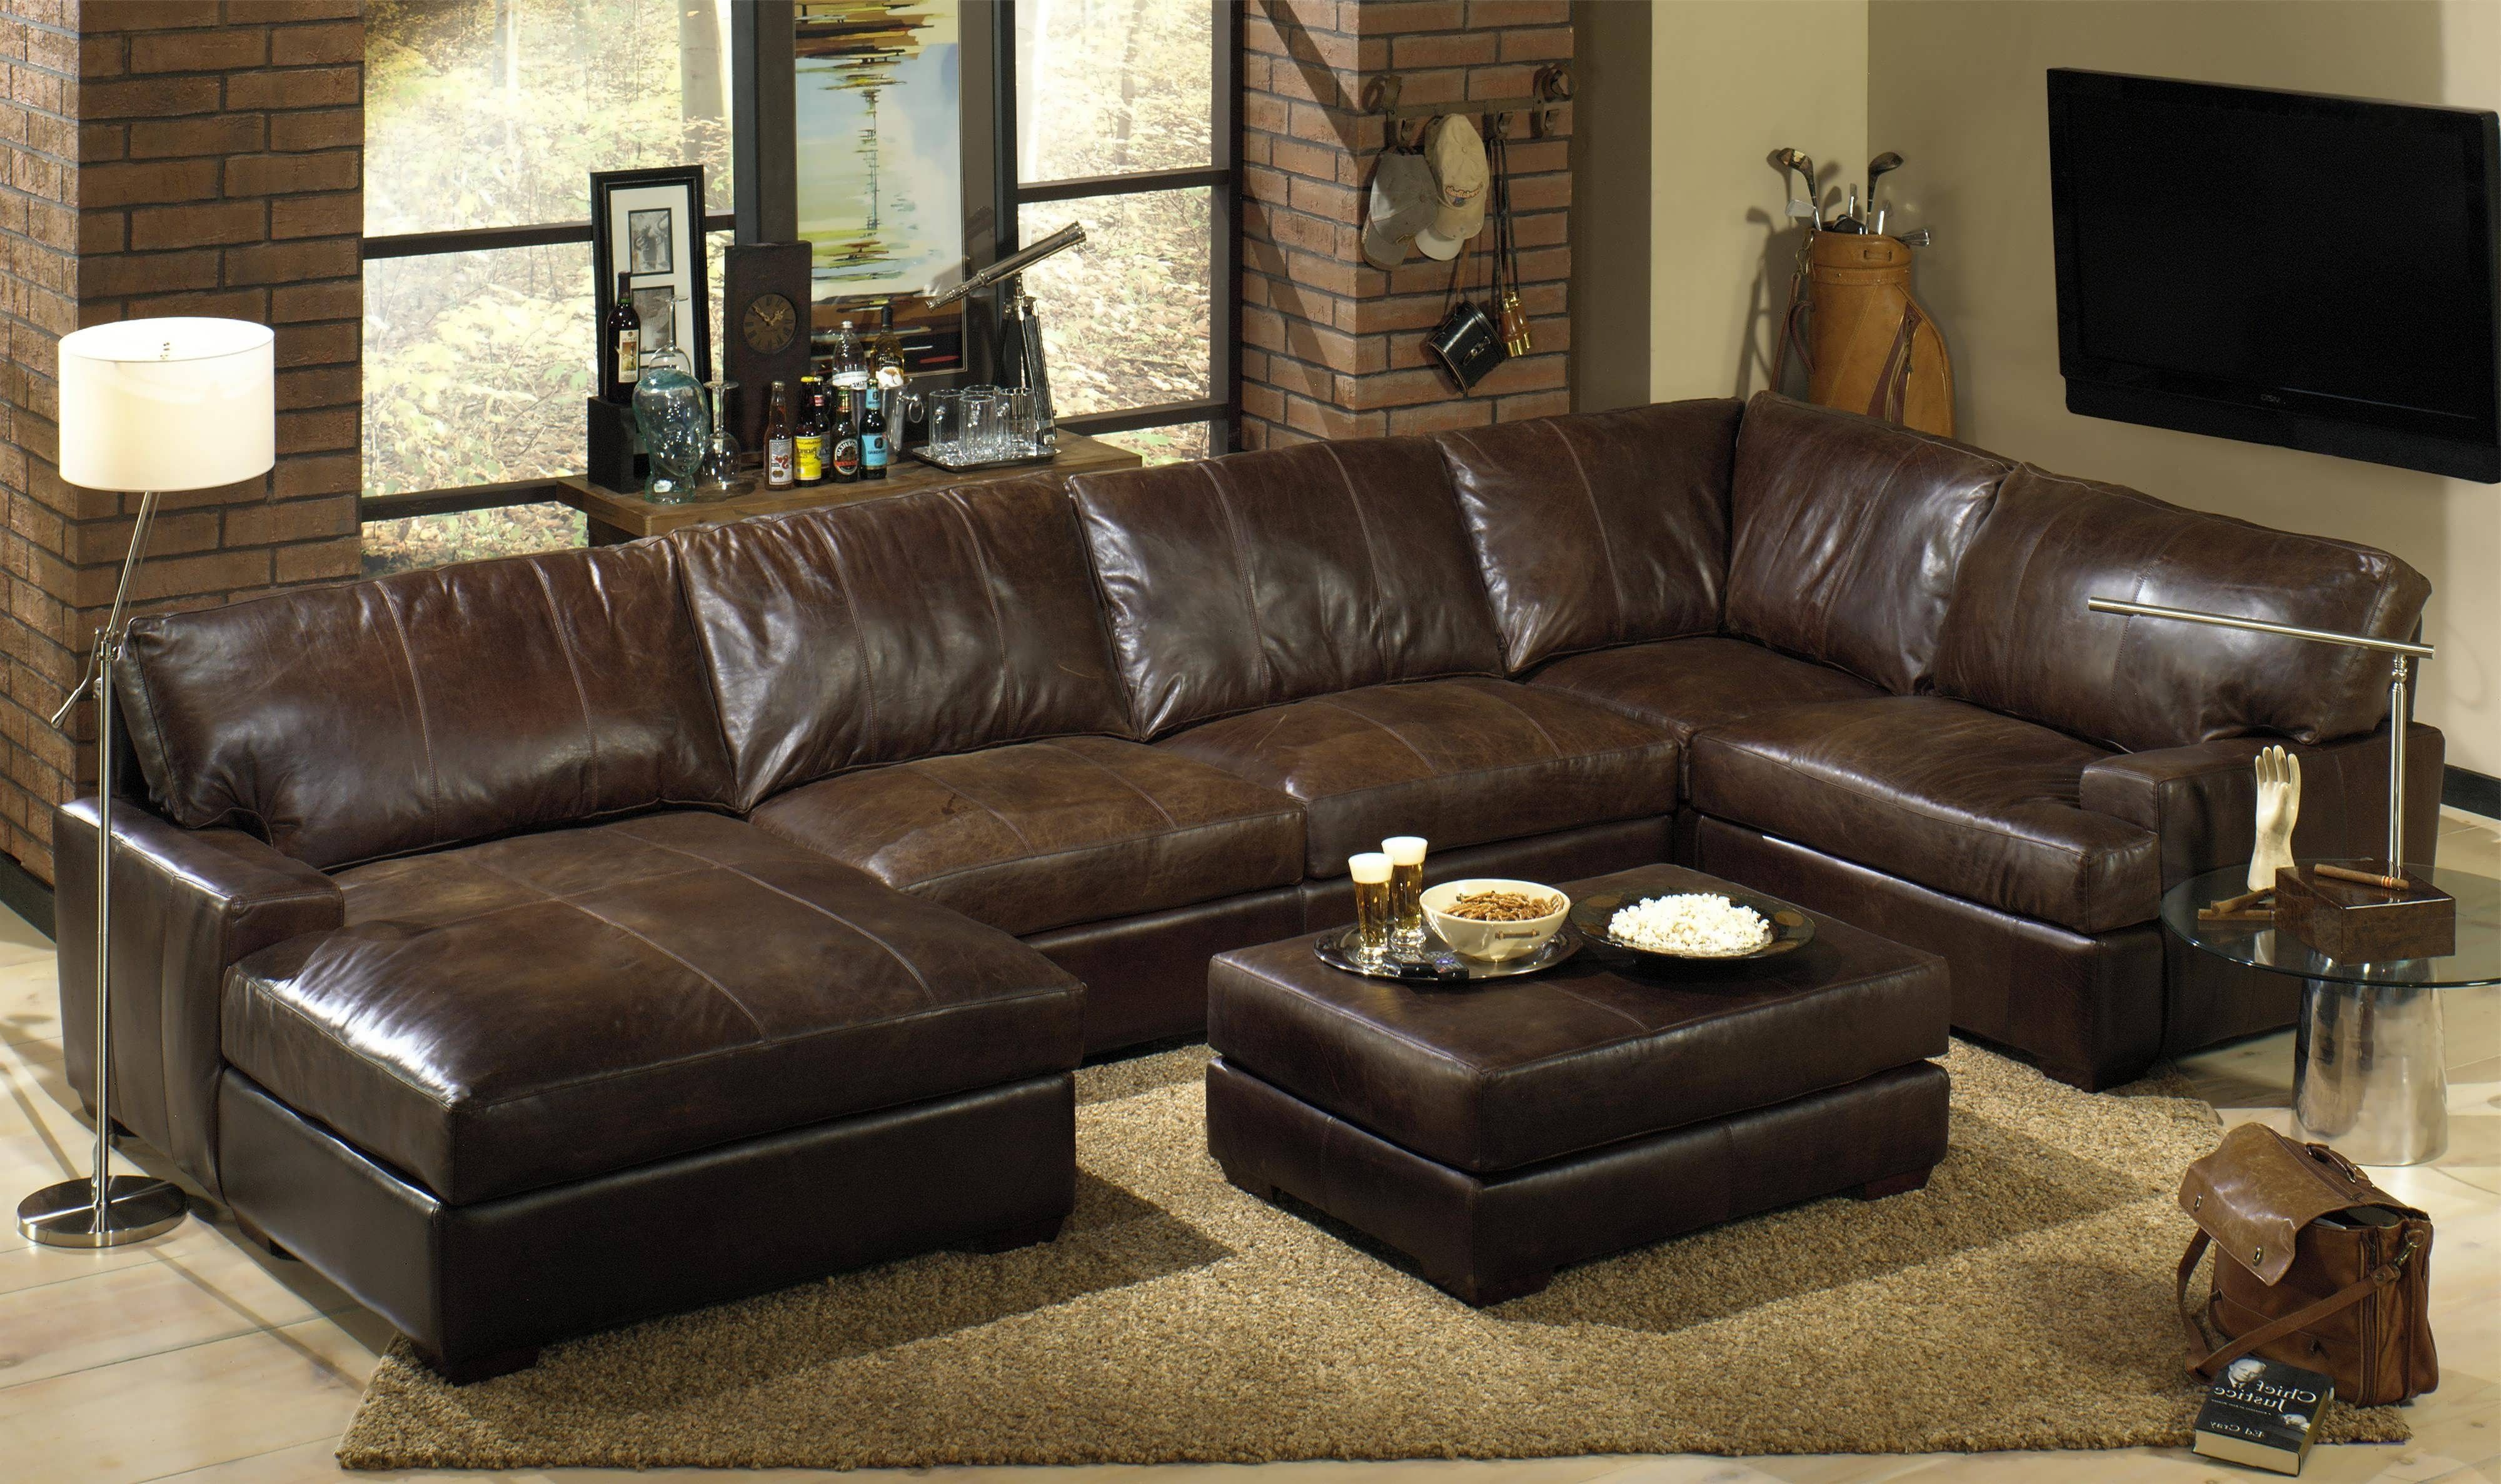 Sofa : Chaise Sofa Sectional With Chaise And Recliner White Throughout Trendy Black Leather Sectionals With Chaise (View 2 of 15)